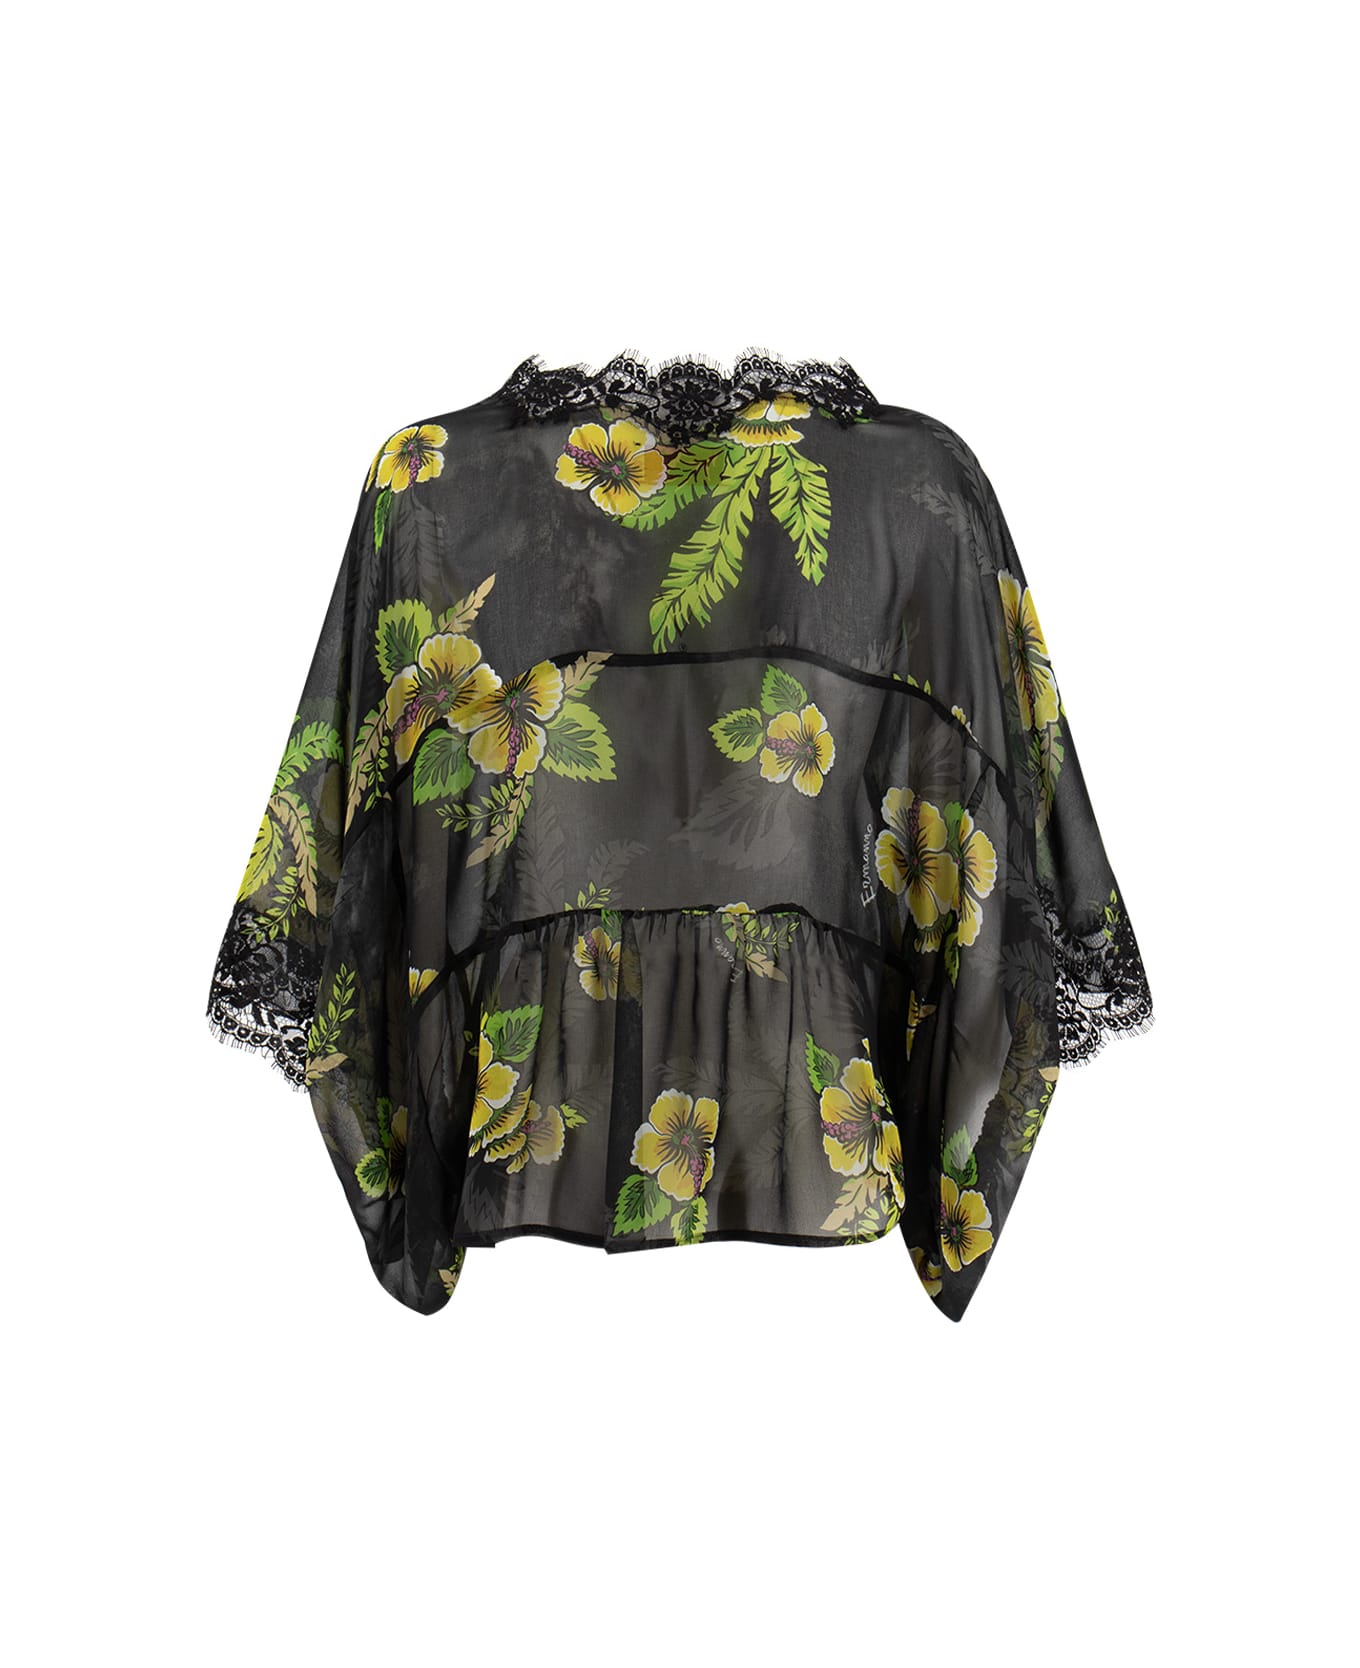 Ermanno Firenze Blouse - BLACK/YELOW/GREEN ブラウス